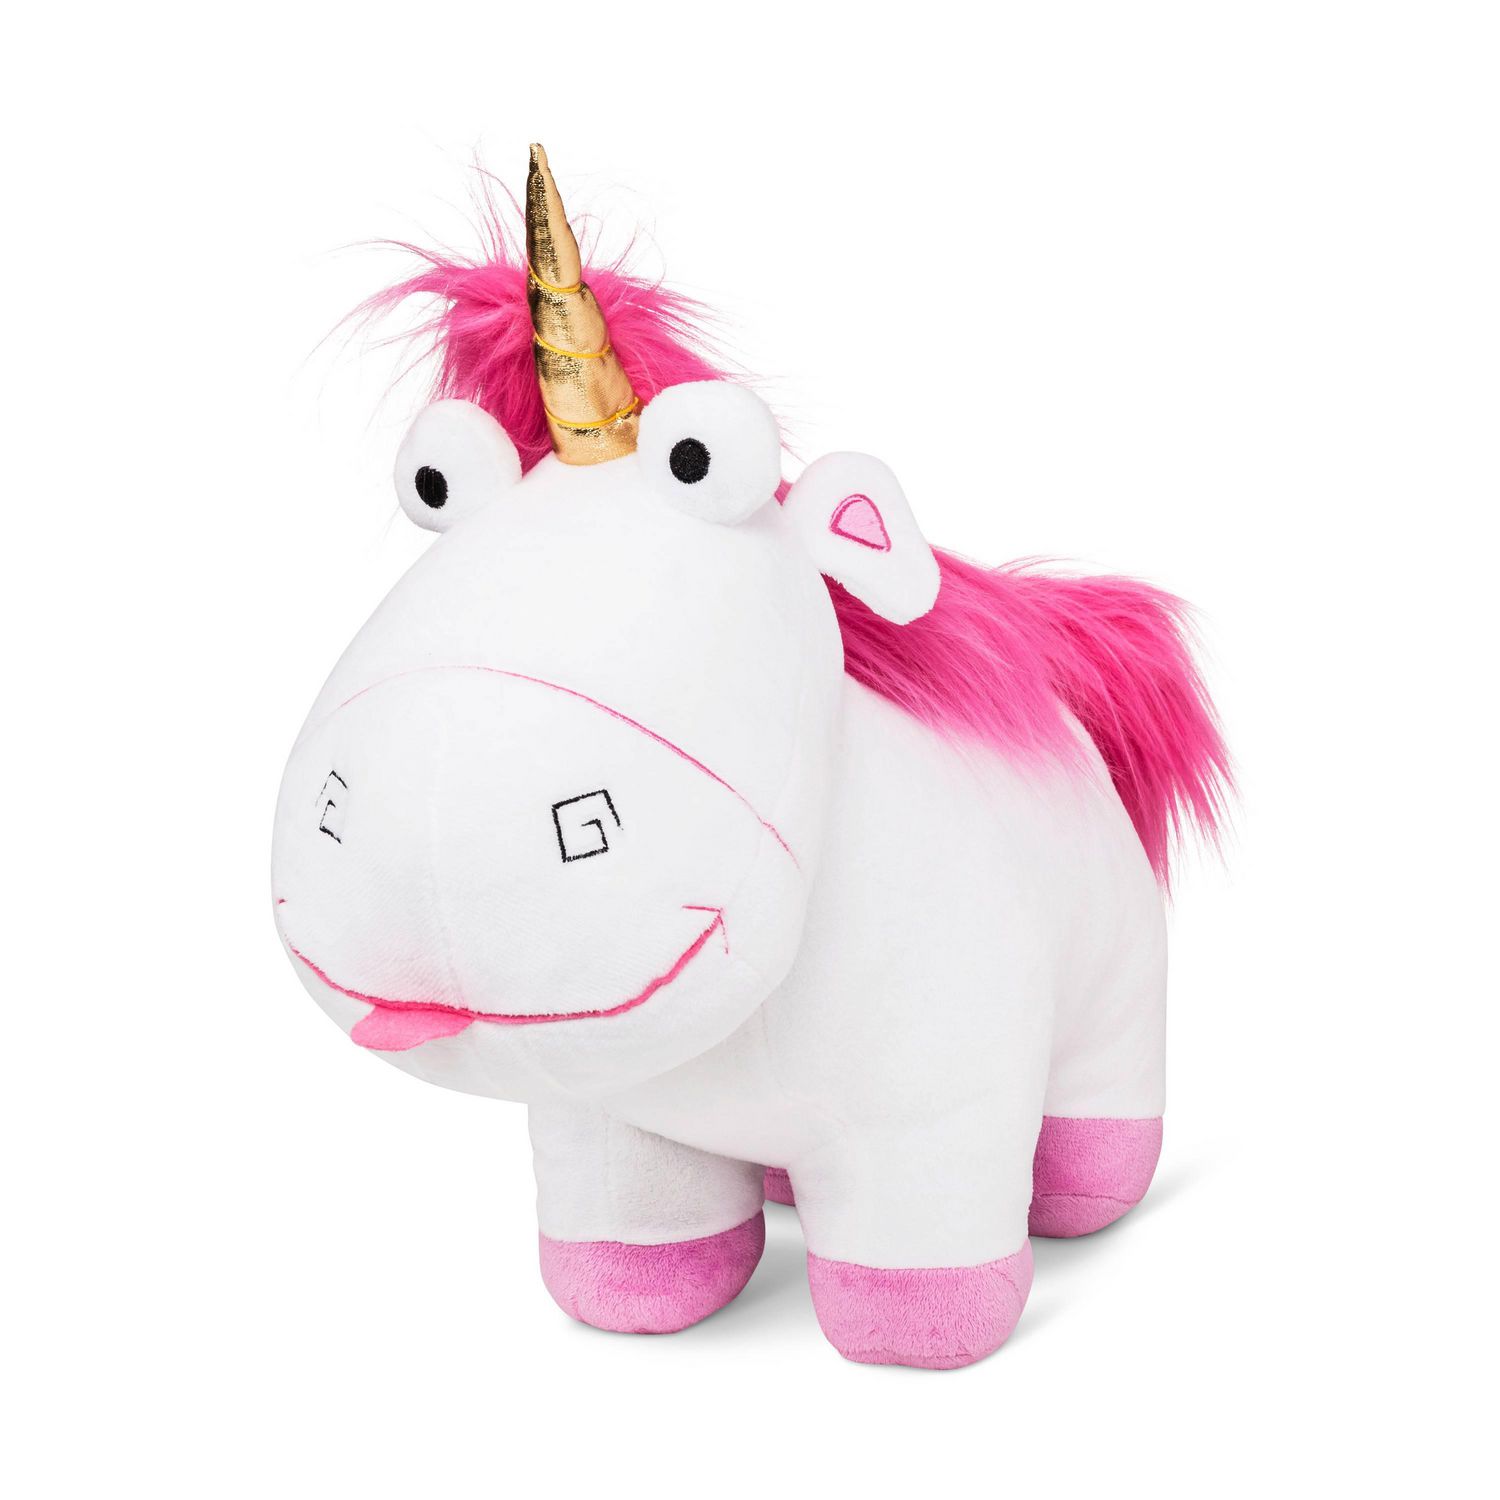 NEW OFFICIAL 22" 15" 10" 7" DESPICABLE ME UNICORN PLUSH SOFT TOY 